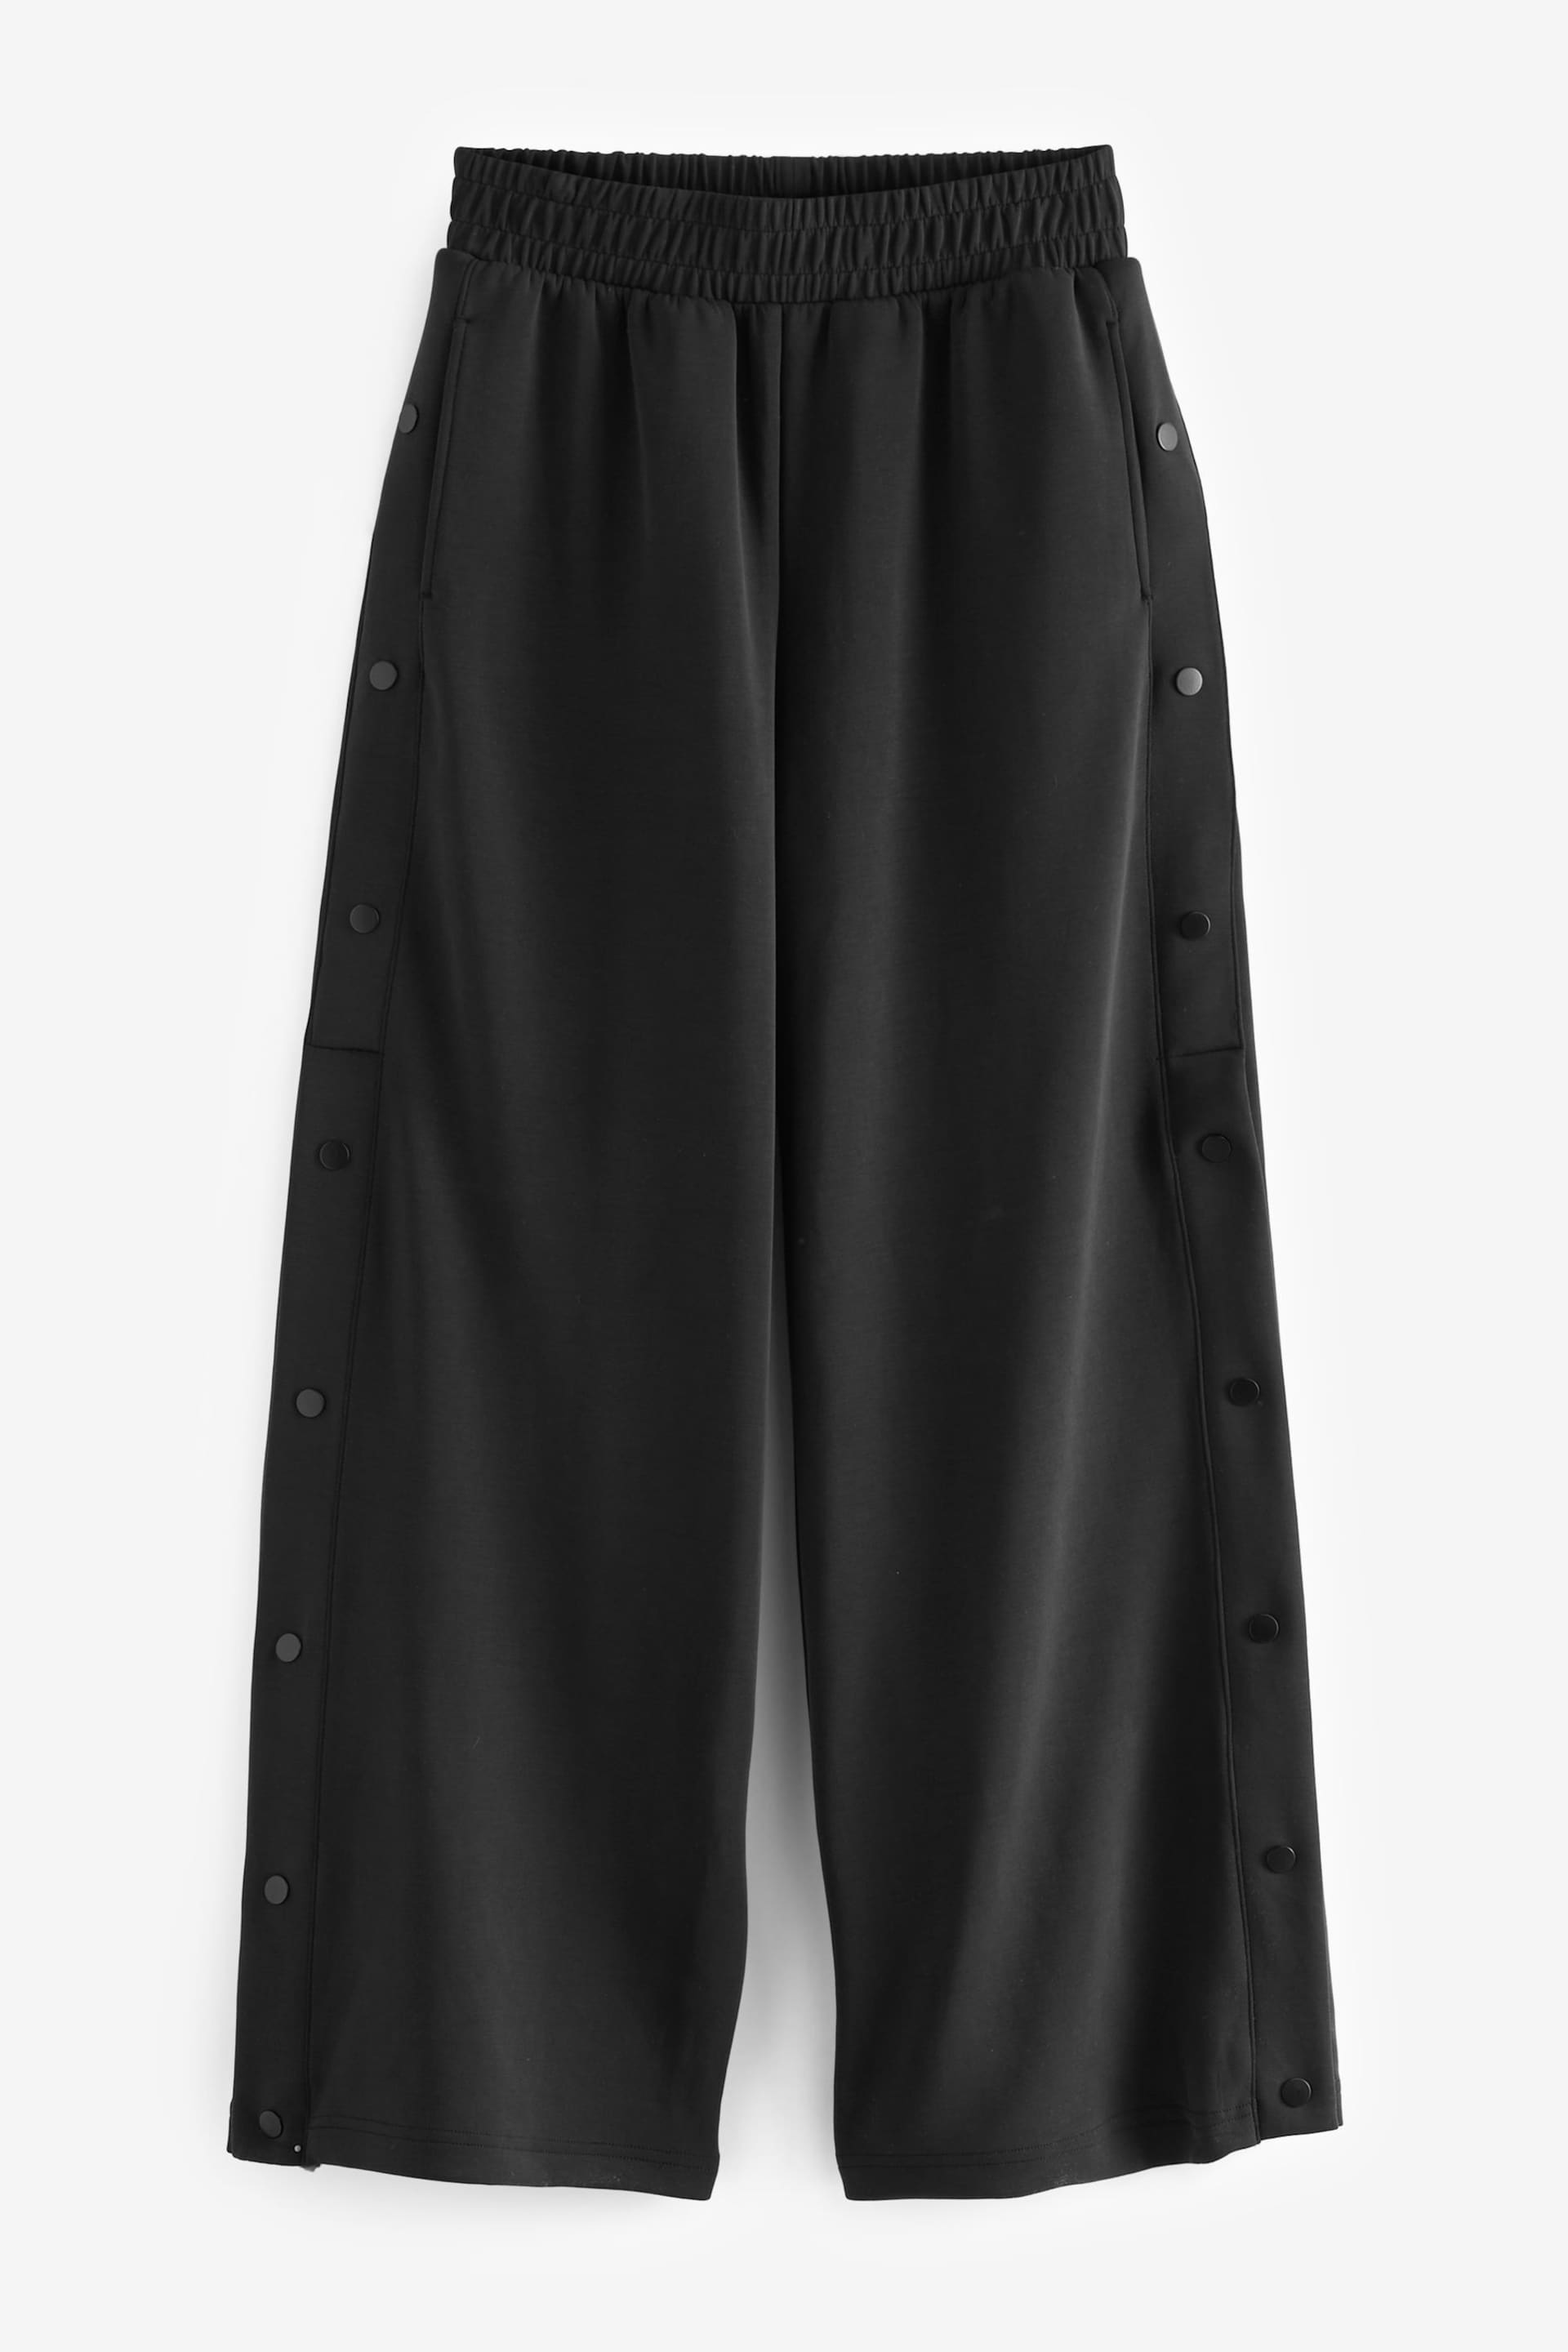 Charcoal Grey Soft Jersey Popper Side Trousers - Image 6 of 7